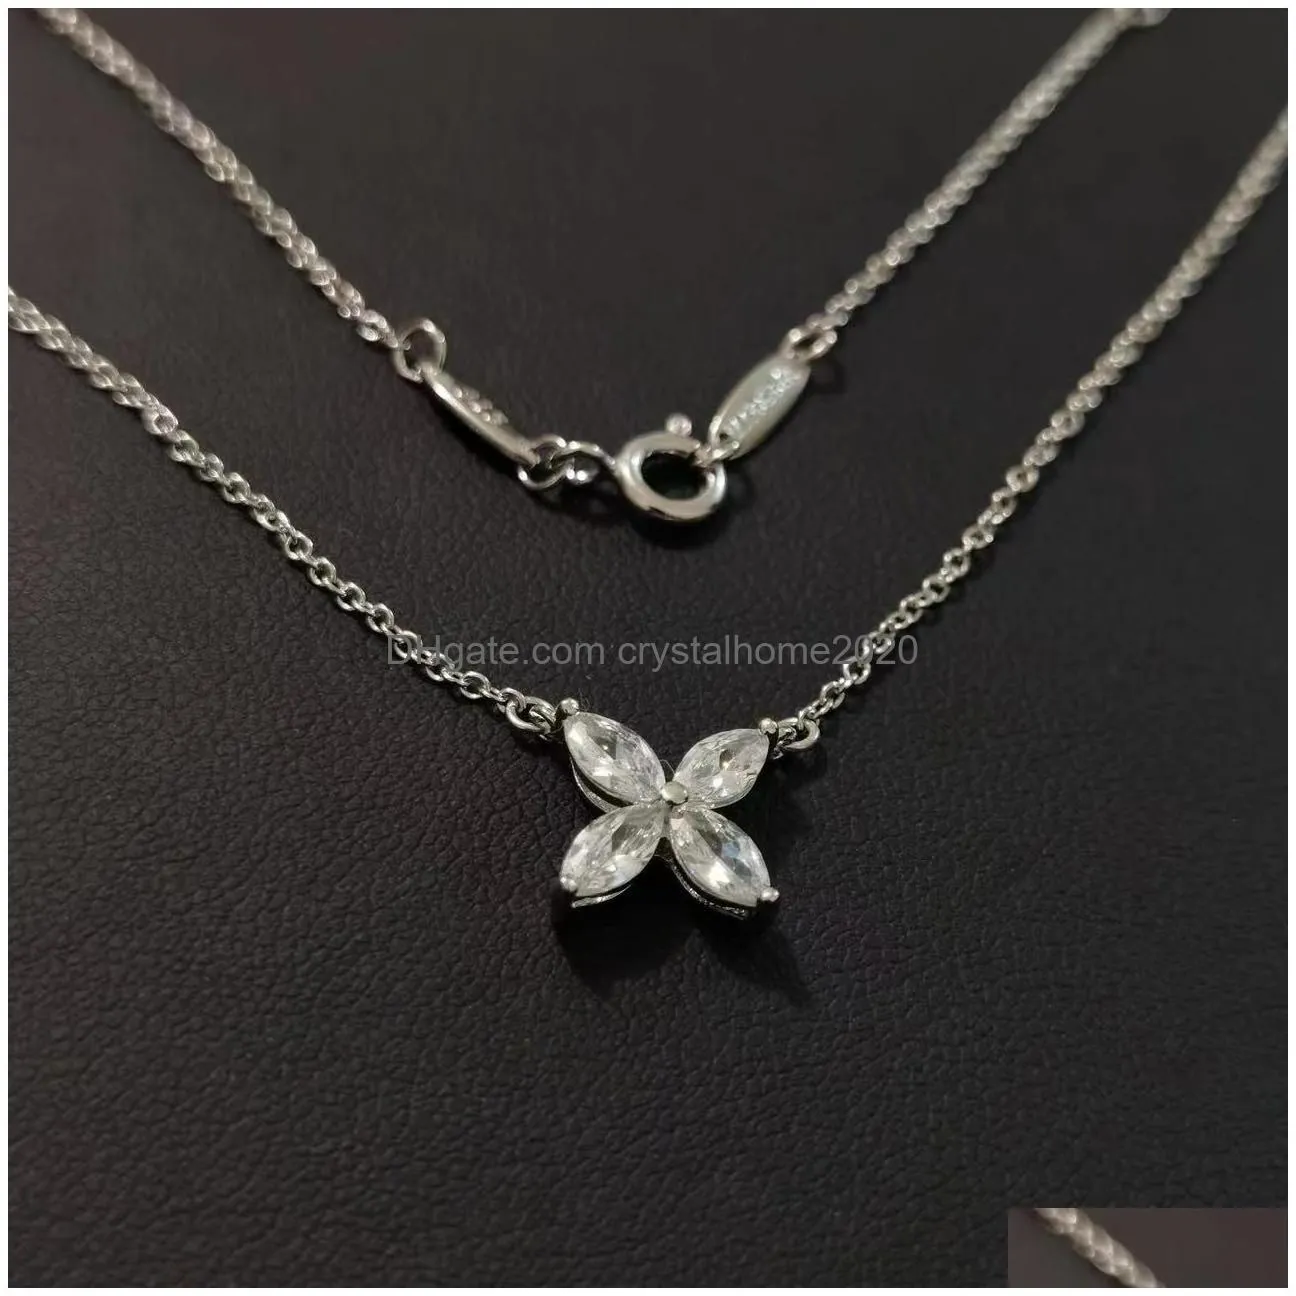 Pendant Necklaces Pendant Necklace Esigner Victoria Top Sterling Sier Flower Crystal Zircon Charm Short Collar Choker With Box Party G Dhrv3